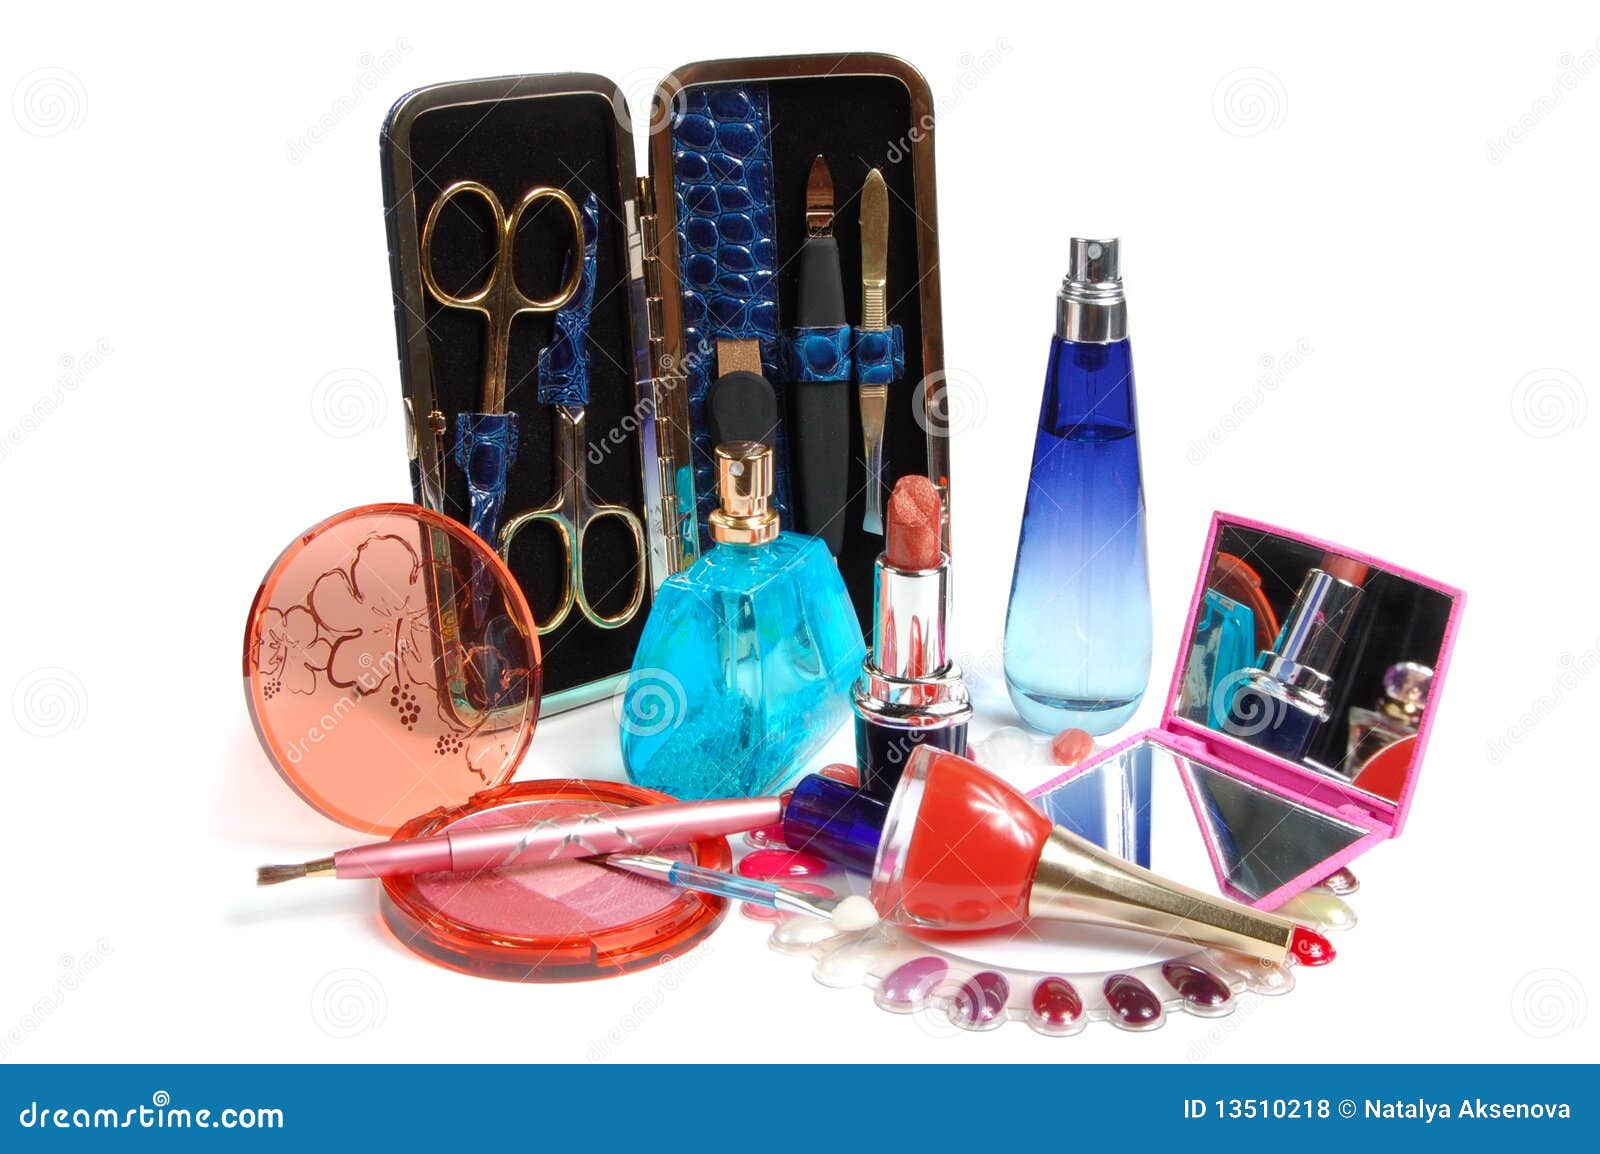 cosmetics, perfumery and tools for nails